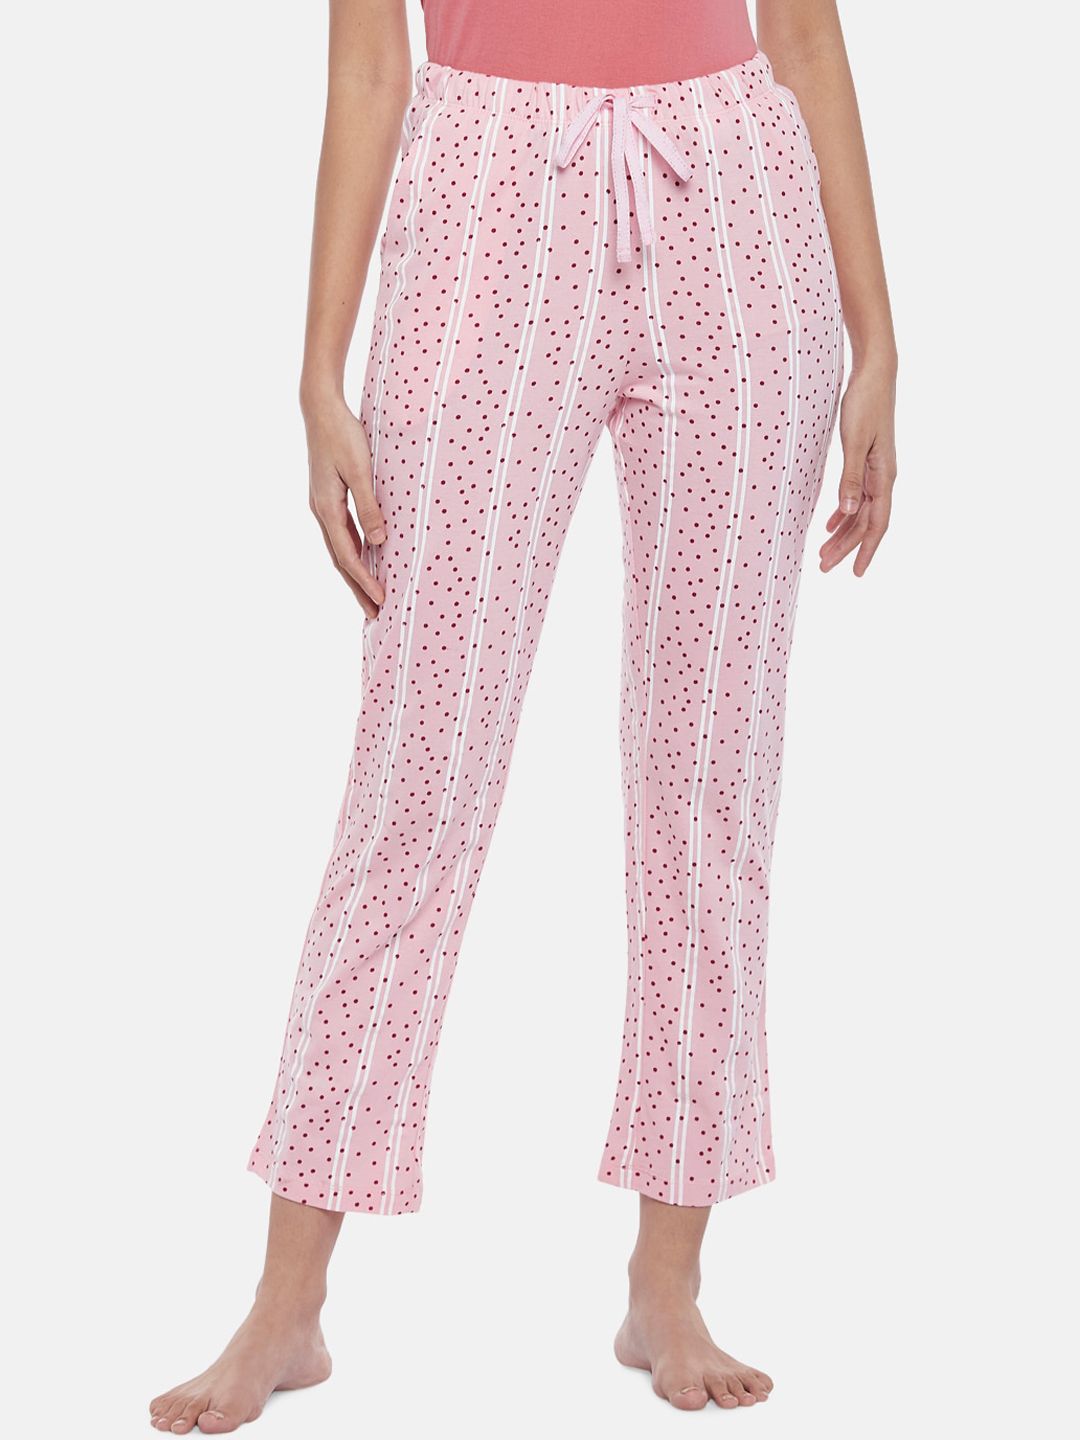 Dreamz by Pantaloons Women Pink Cotton Printed Lounge Pants Price in India